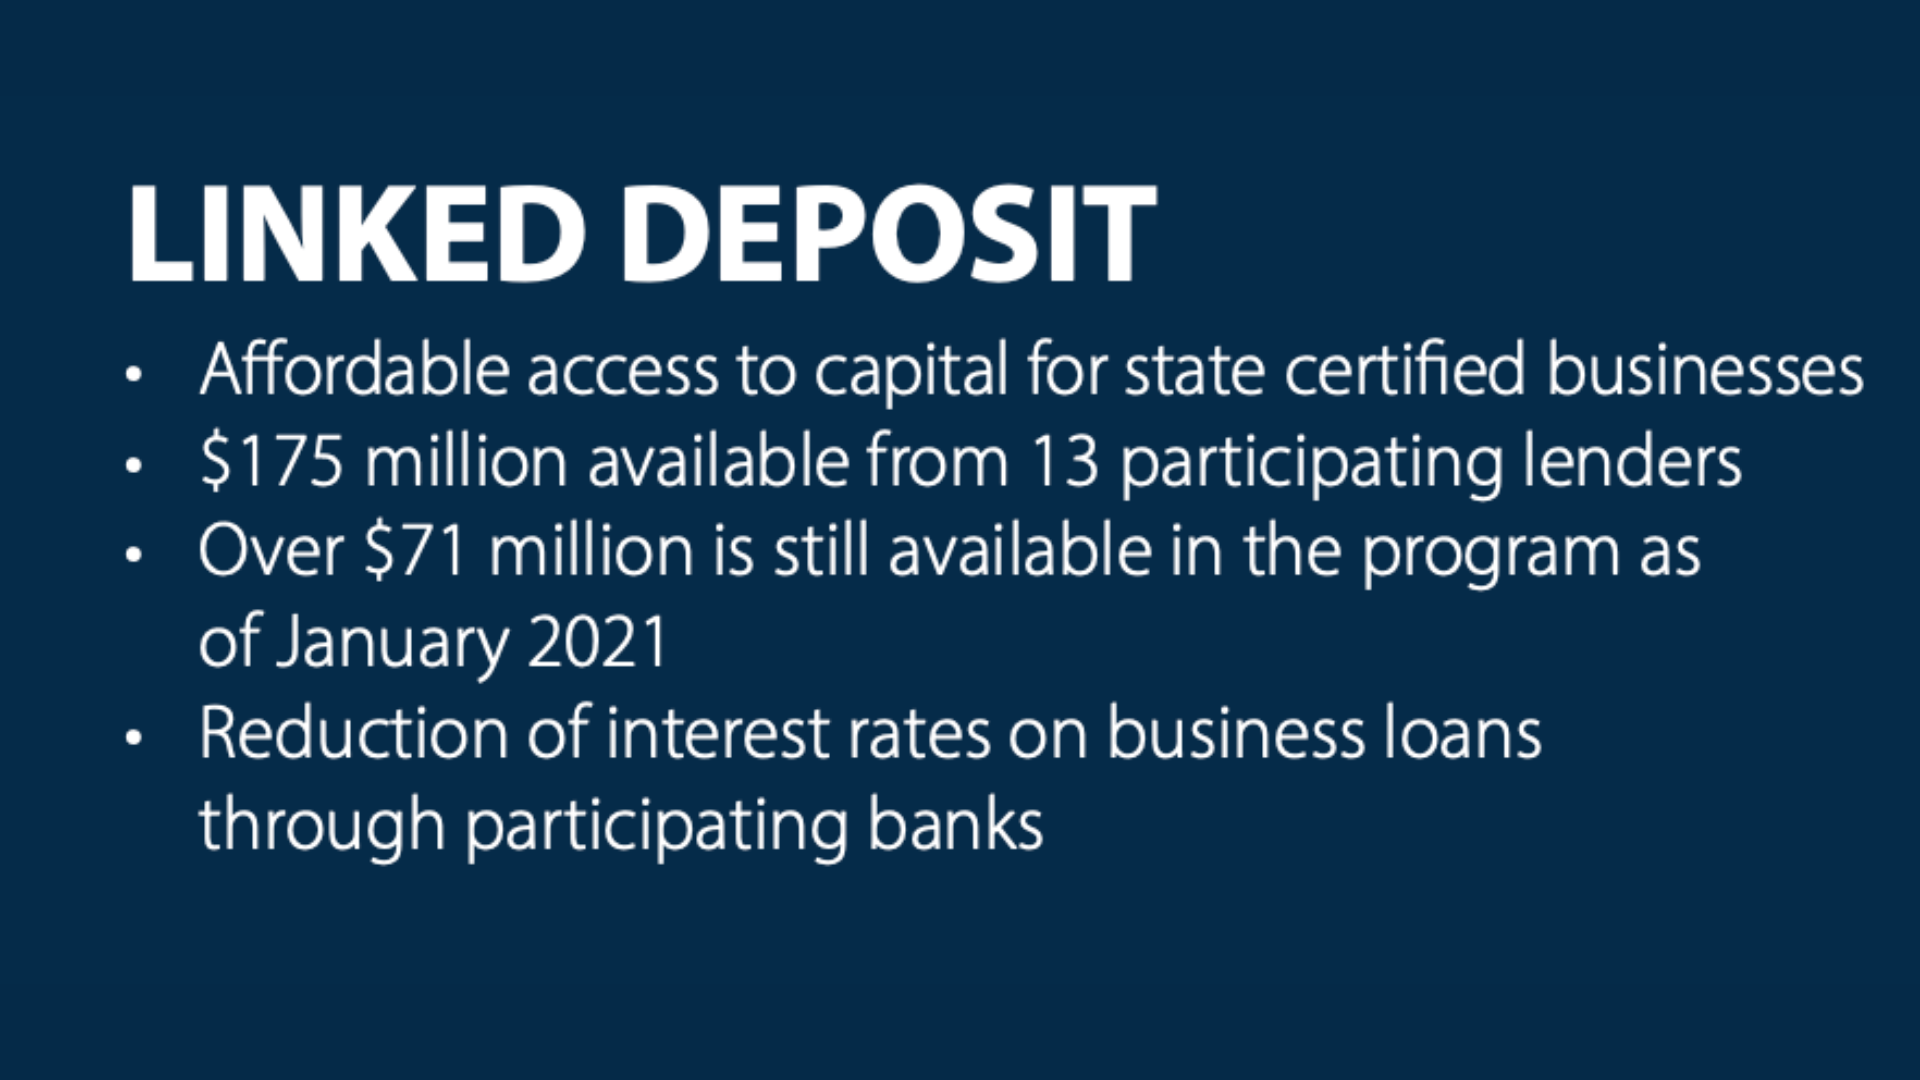 Graphic titled 'Linked Deposit' detailing affordable access to capital for state-certified businesses. It mentions $175 million available from 13 participating lenders, over $71 million still available as of January 2021, and a reduction of interest rates on business loans through participating banks.